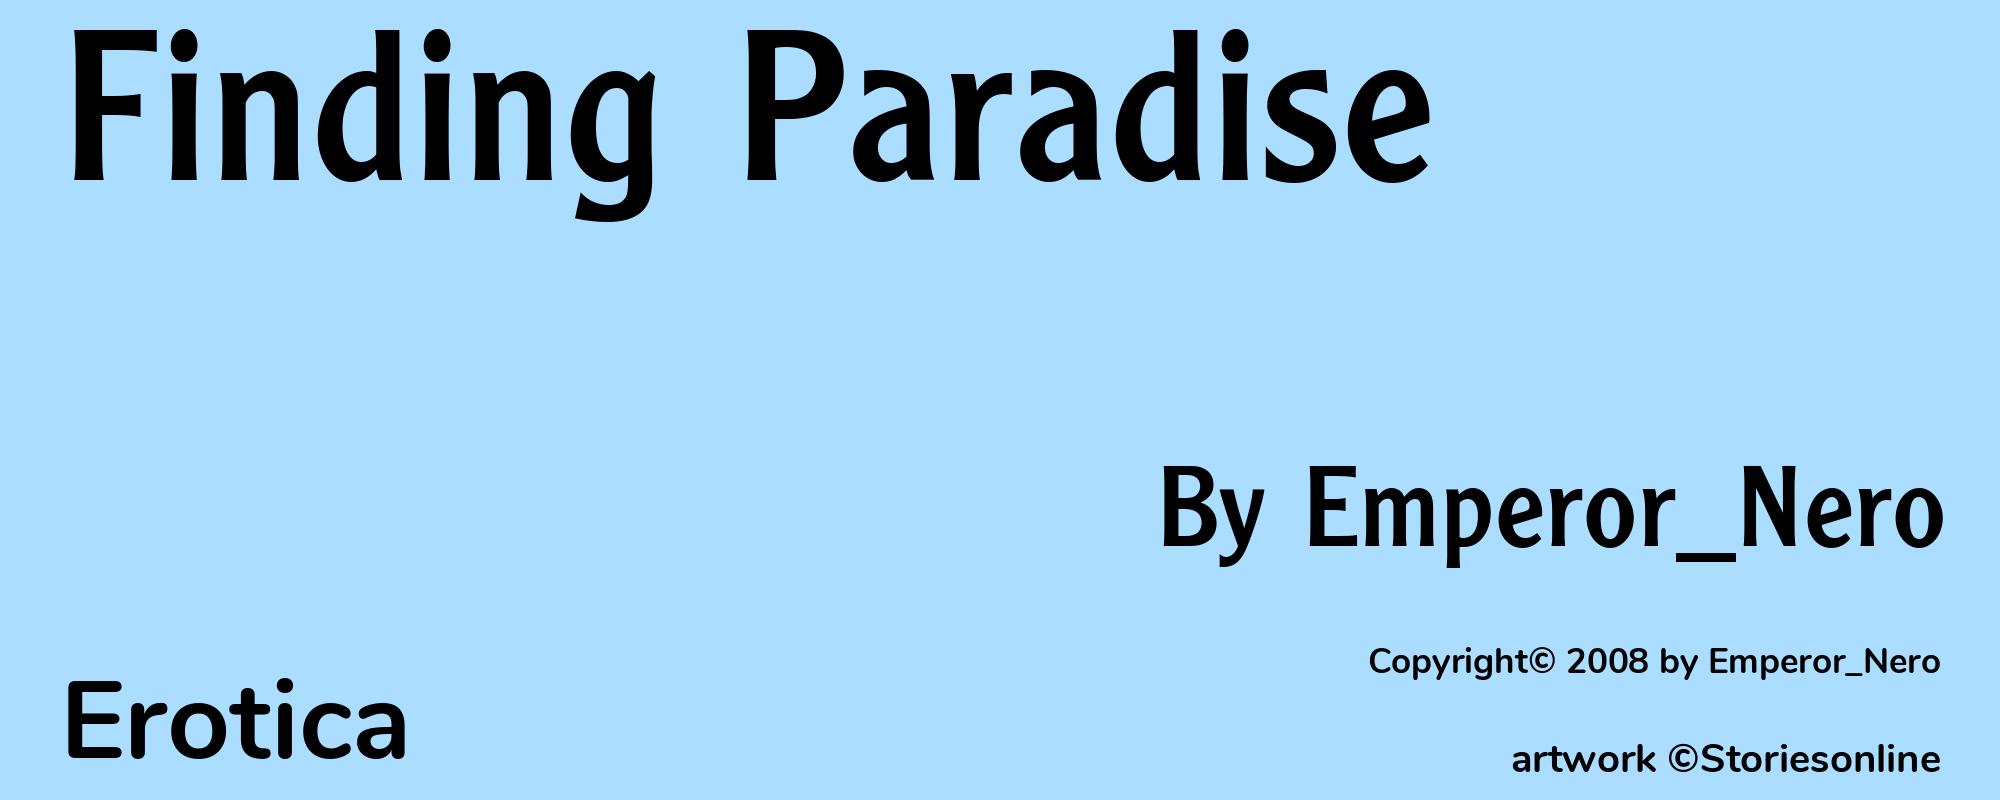 Finding Paradise - Cover